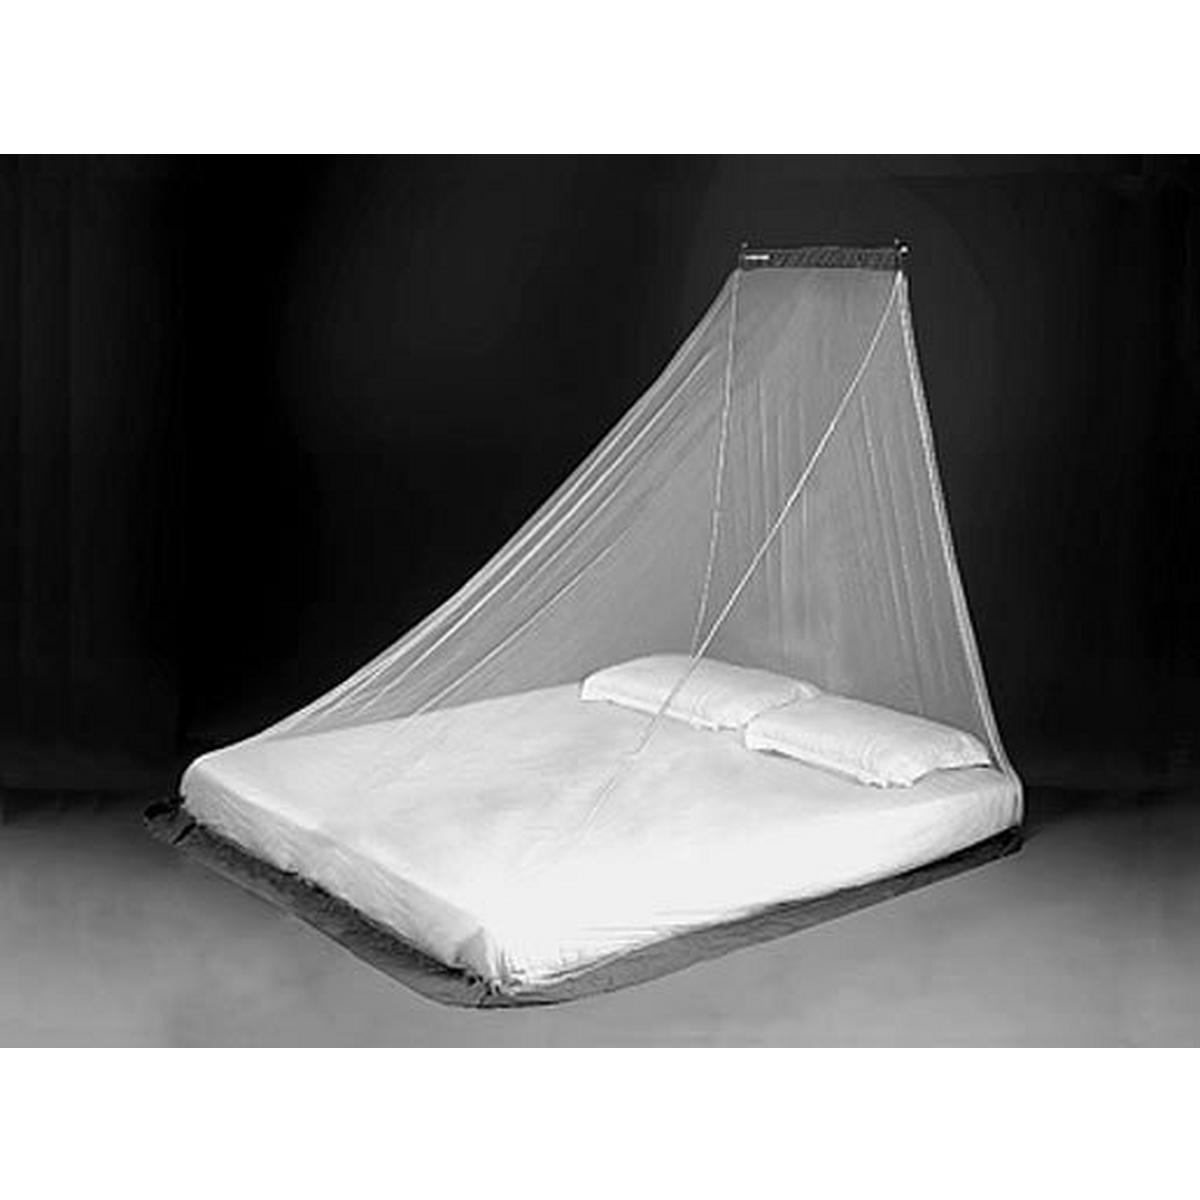 Lifesystems MicroNet Mosquito Net - Double